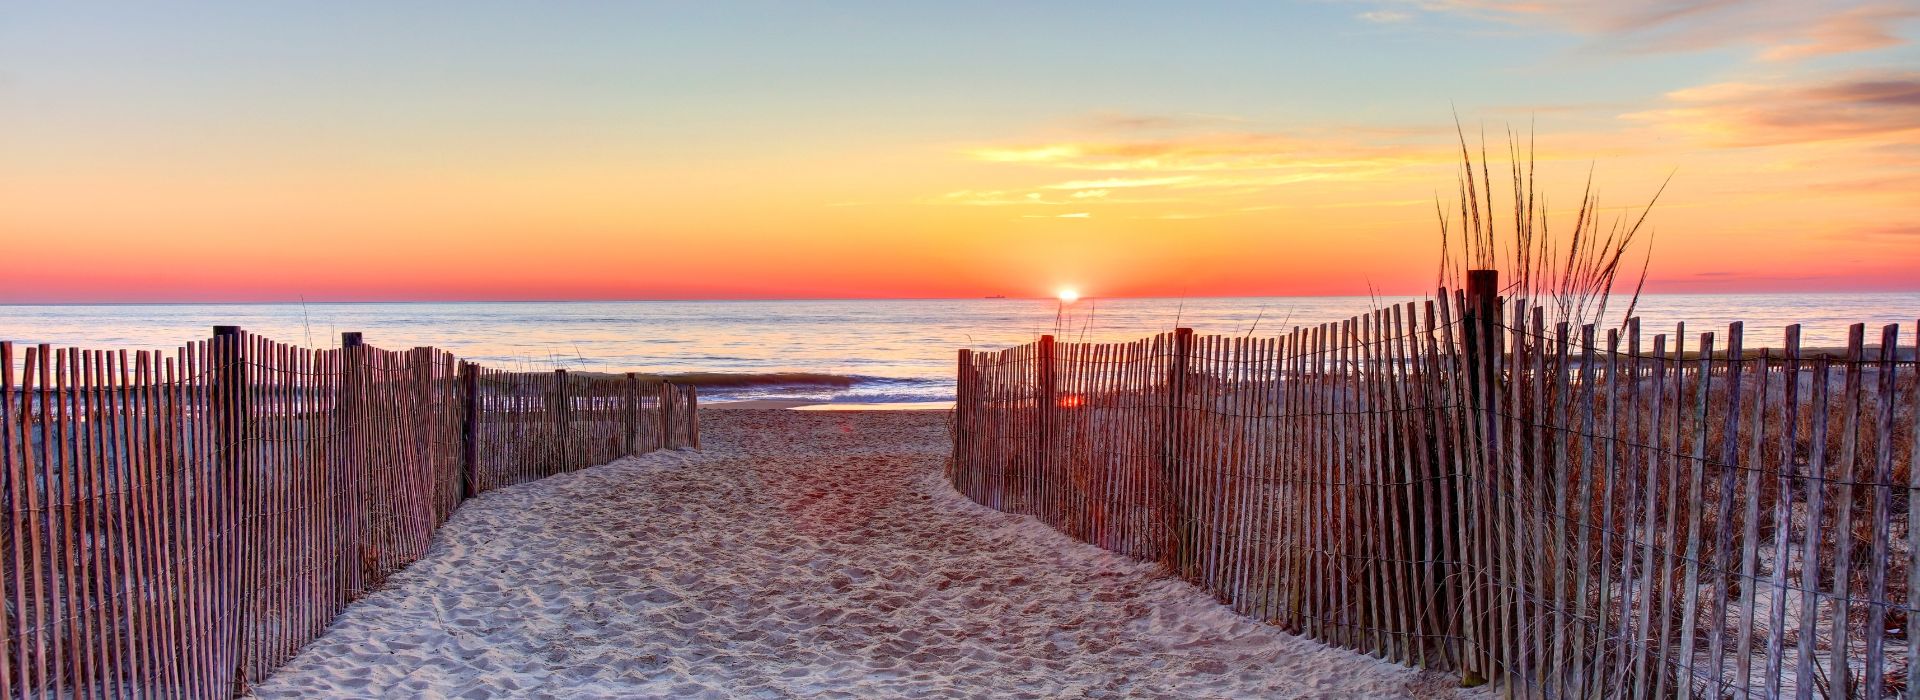 Sandy walkway to the beach overlooking a brilliant sunset over Rehoboth beach 